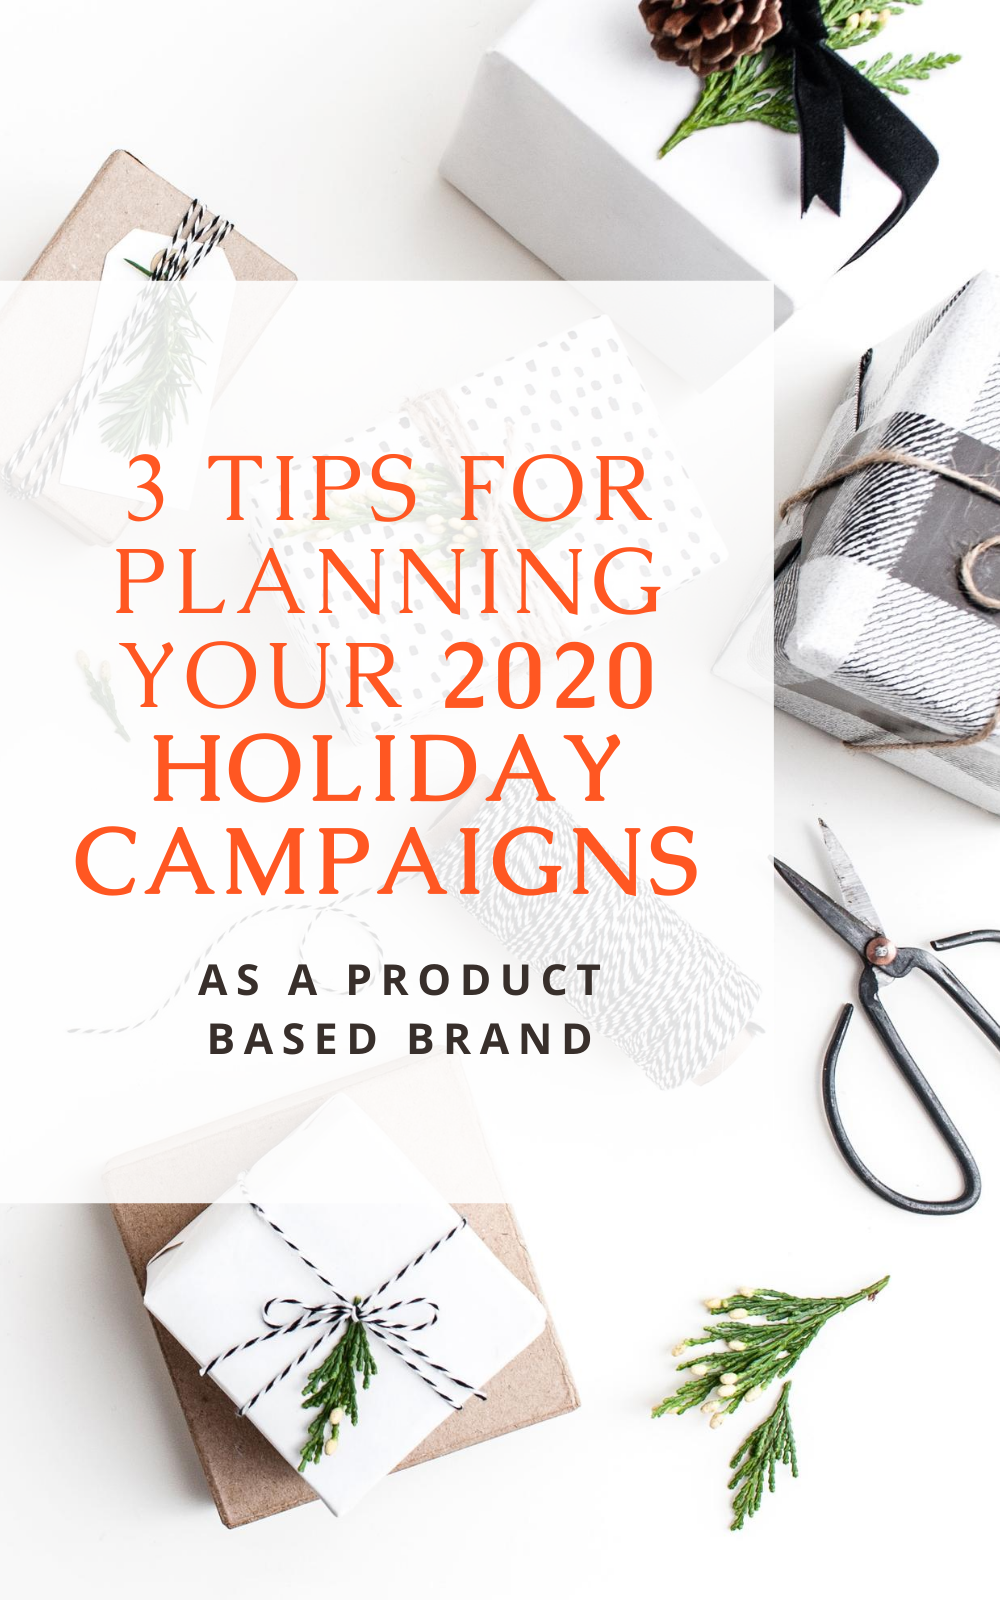 Holiday 2020 Campaign Tips for Small Businesses